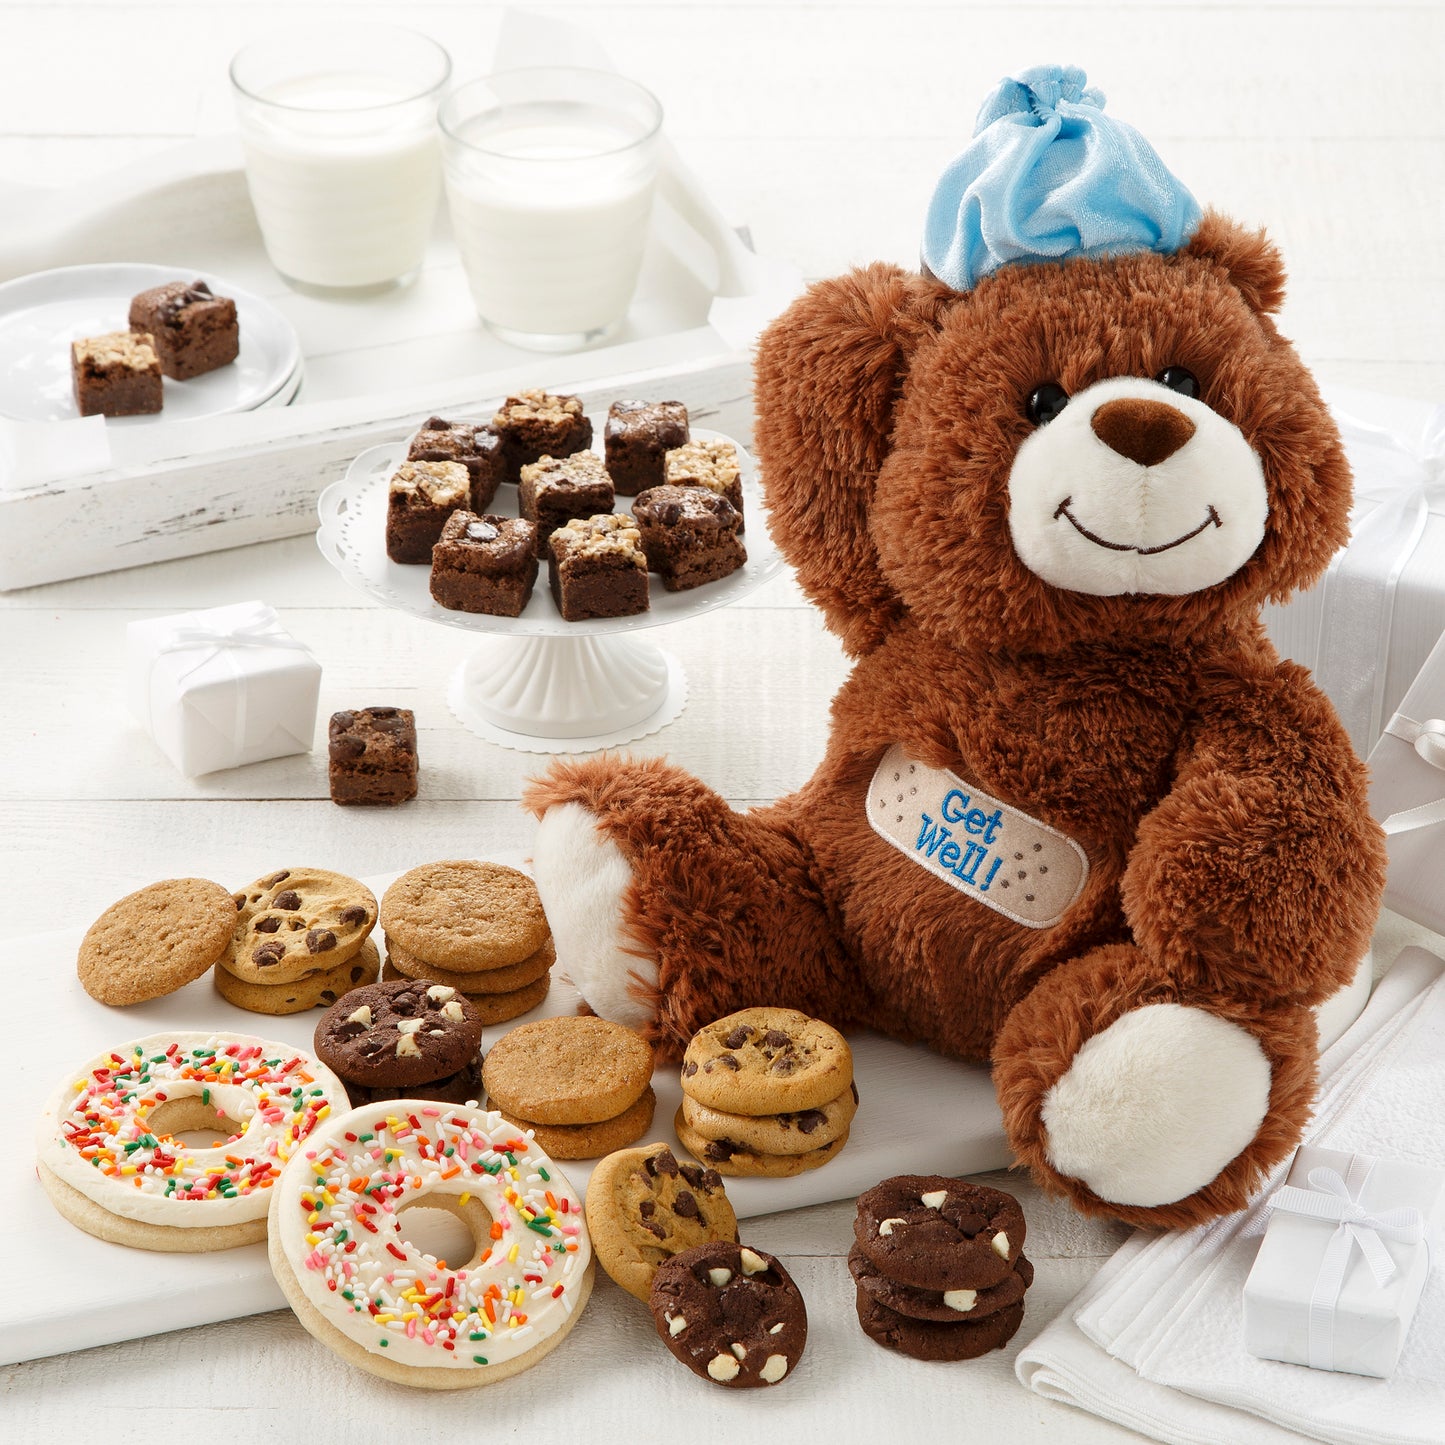 A stuffed Get Well bear surrounded by an assortment of nibblers, brownie bites, and frosted donut cookies with sprinkles